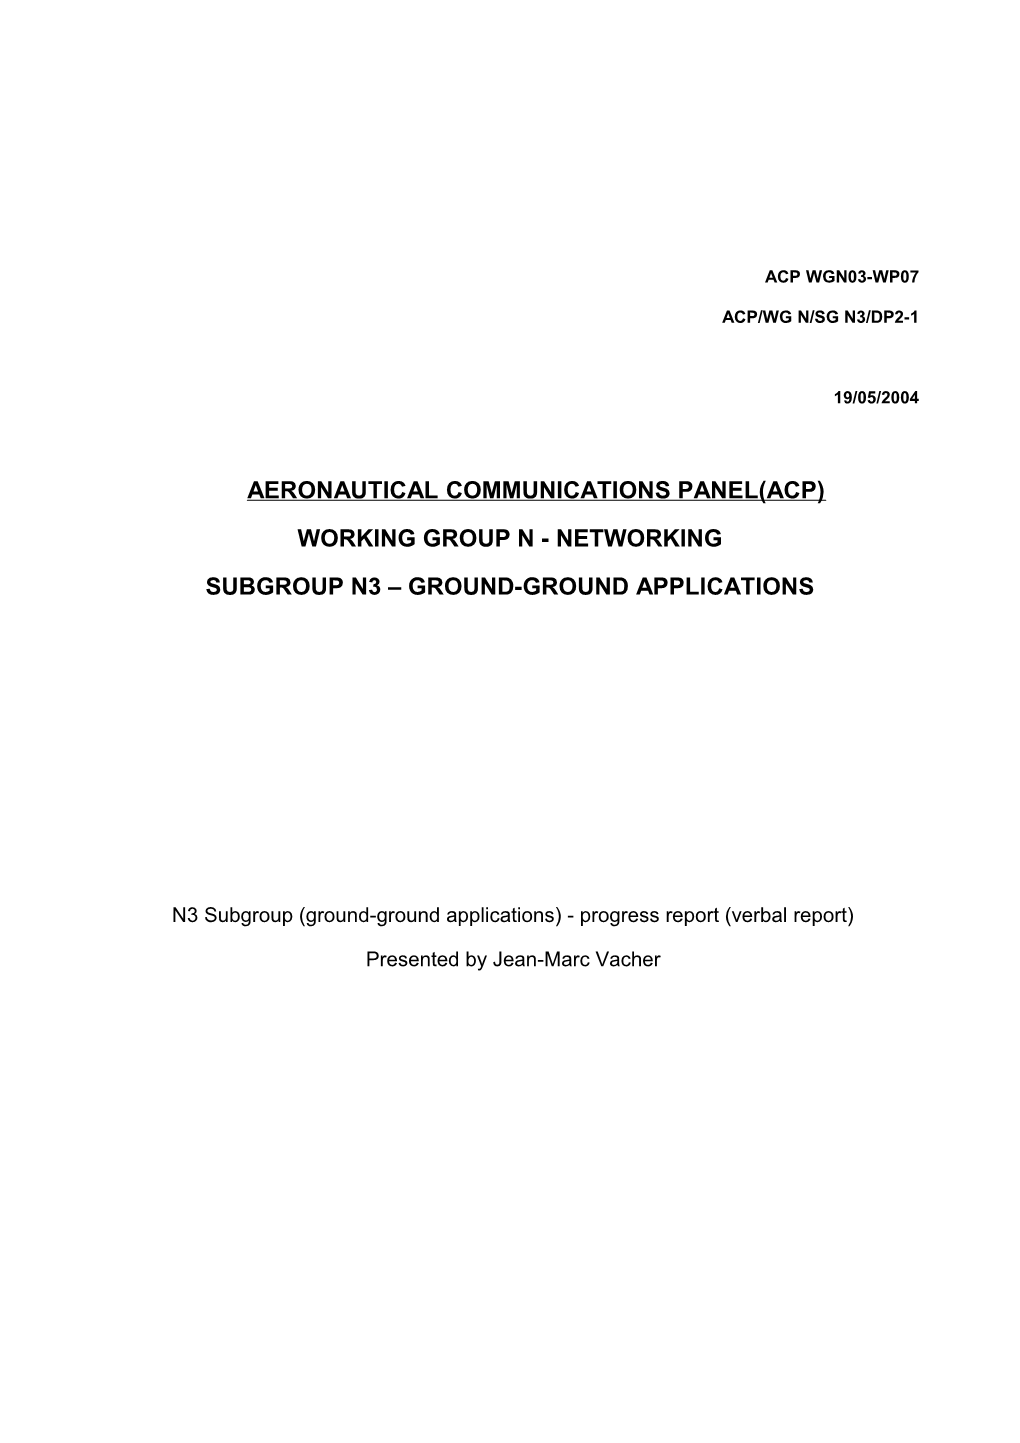 N3 Subgroup (Ground-Ground Applications) - Progress Report (Verbal Report)